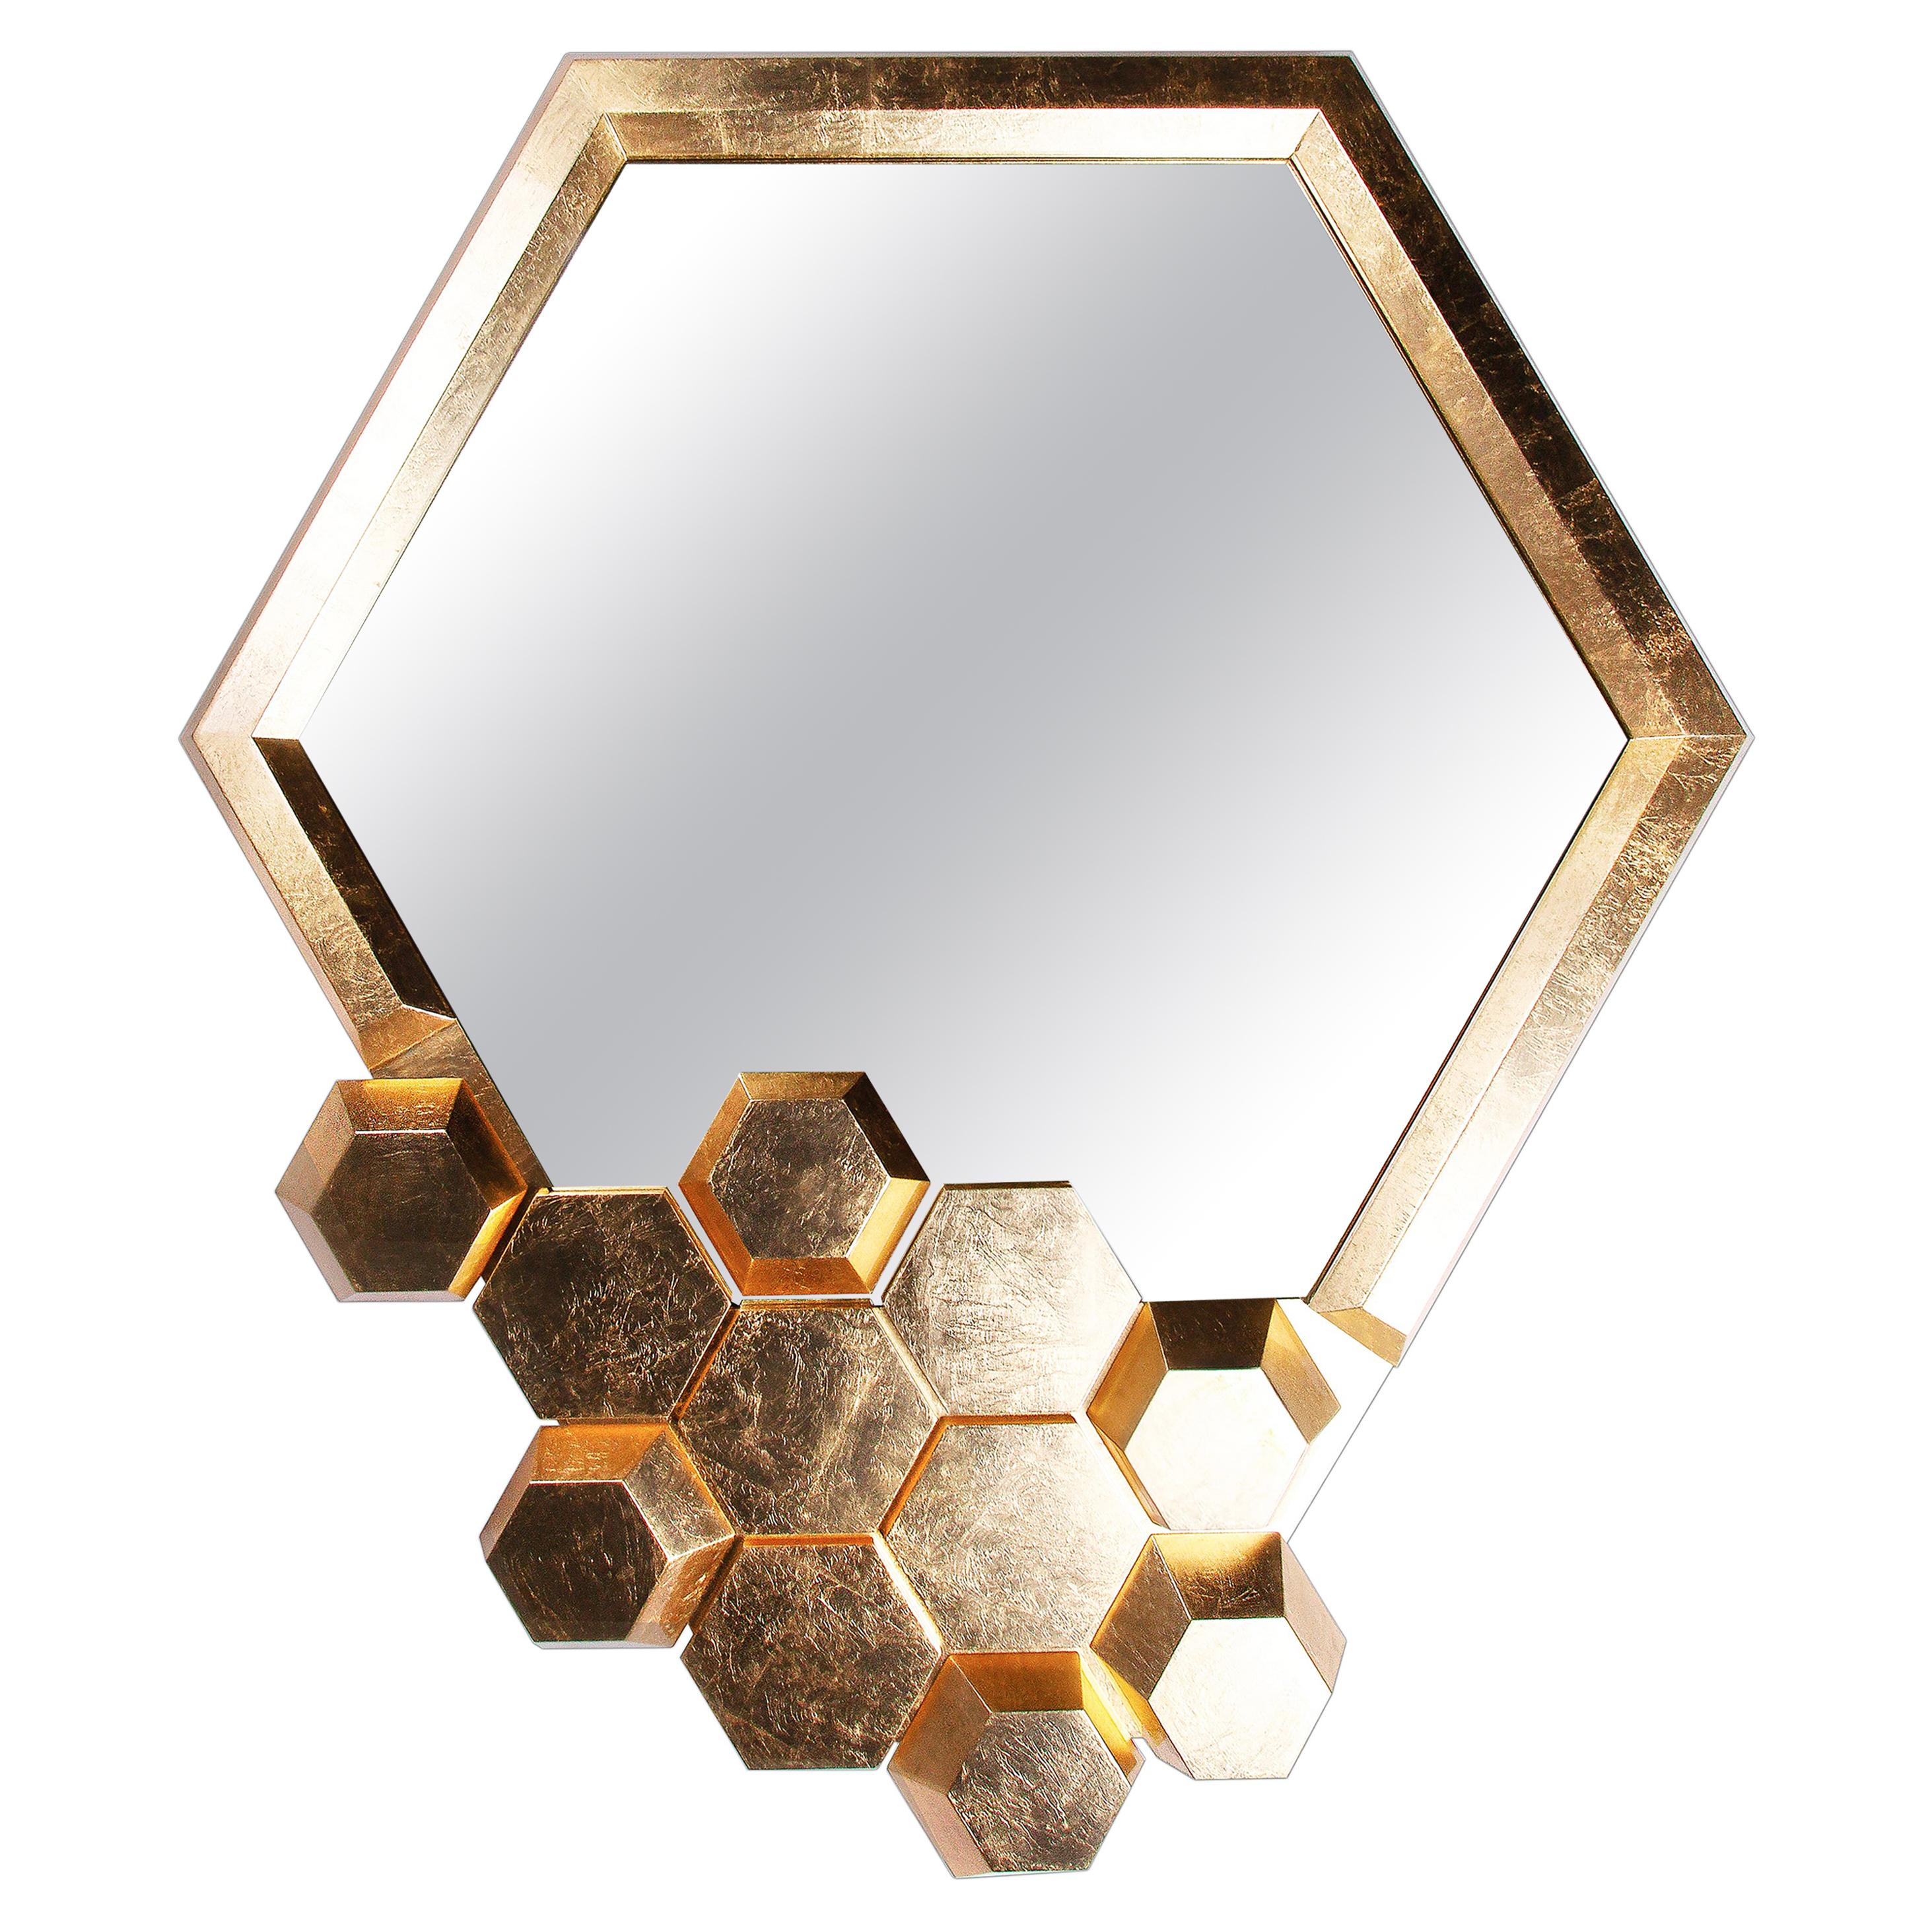 Honeycomb Limited Edition Wall Mirror, Royal Stranger For Sale